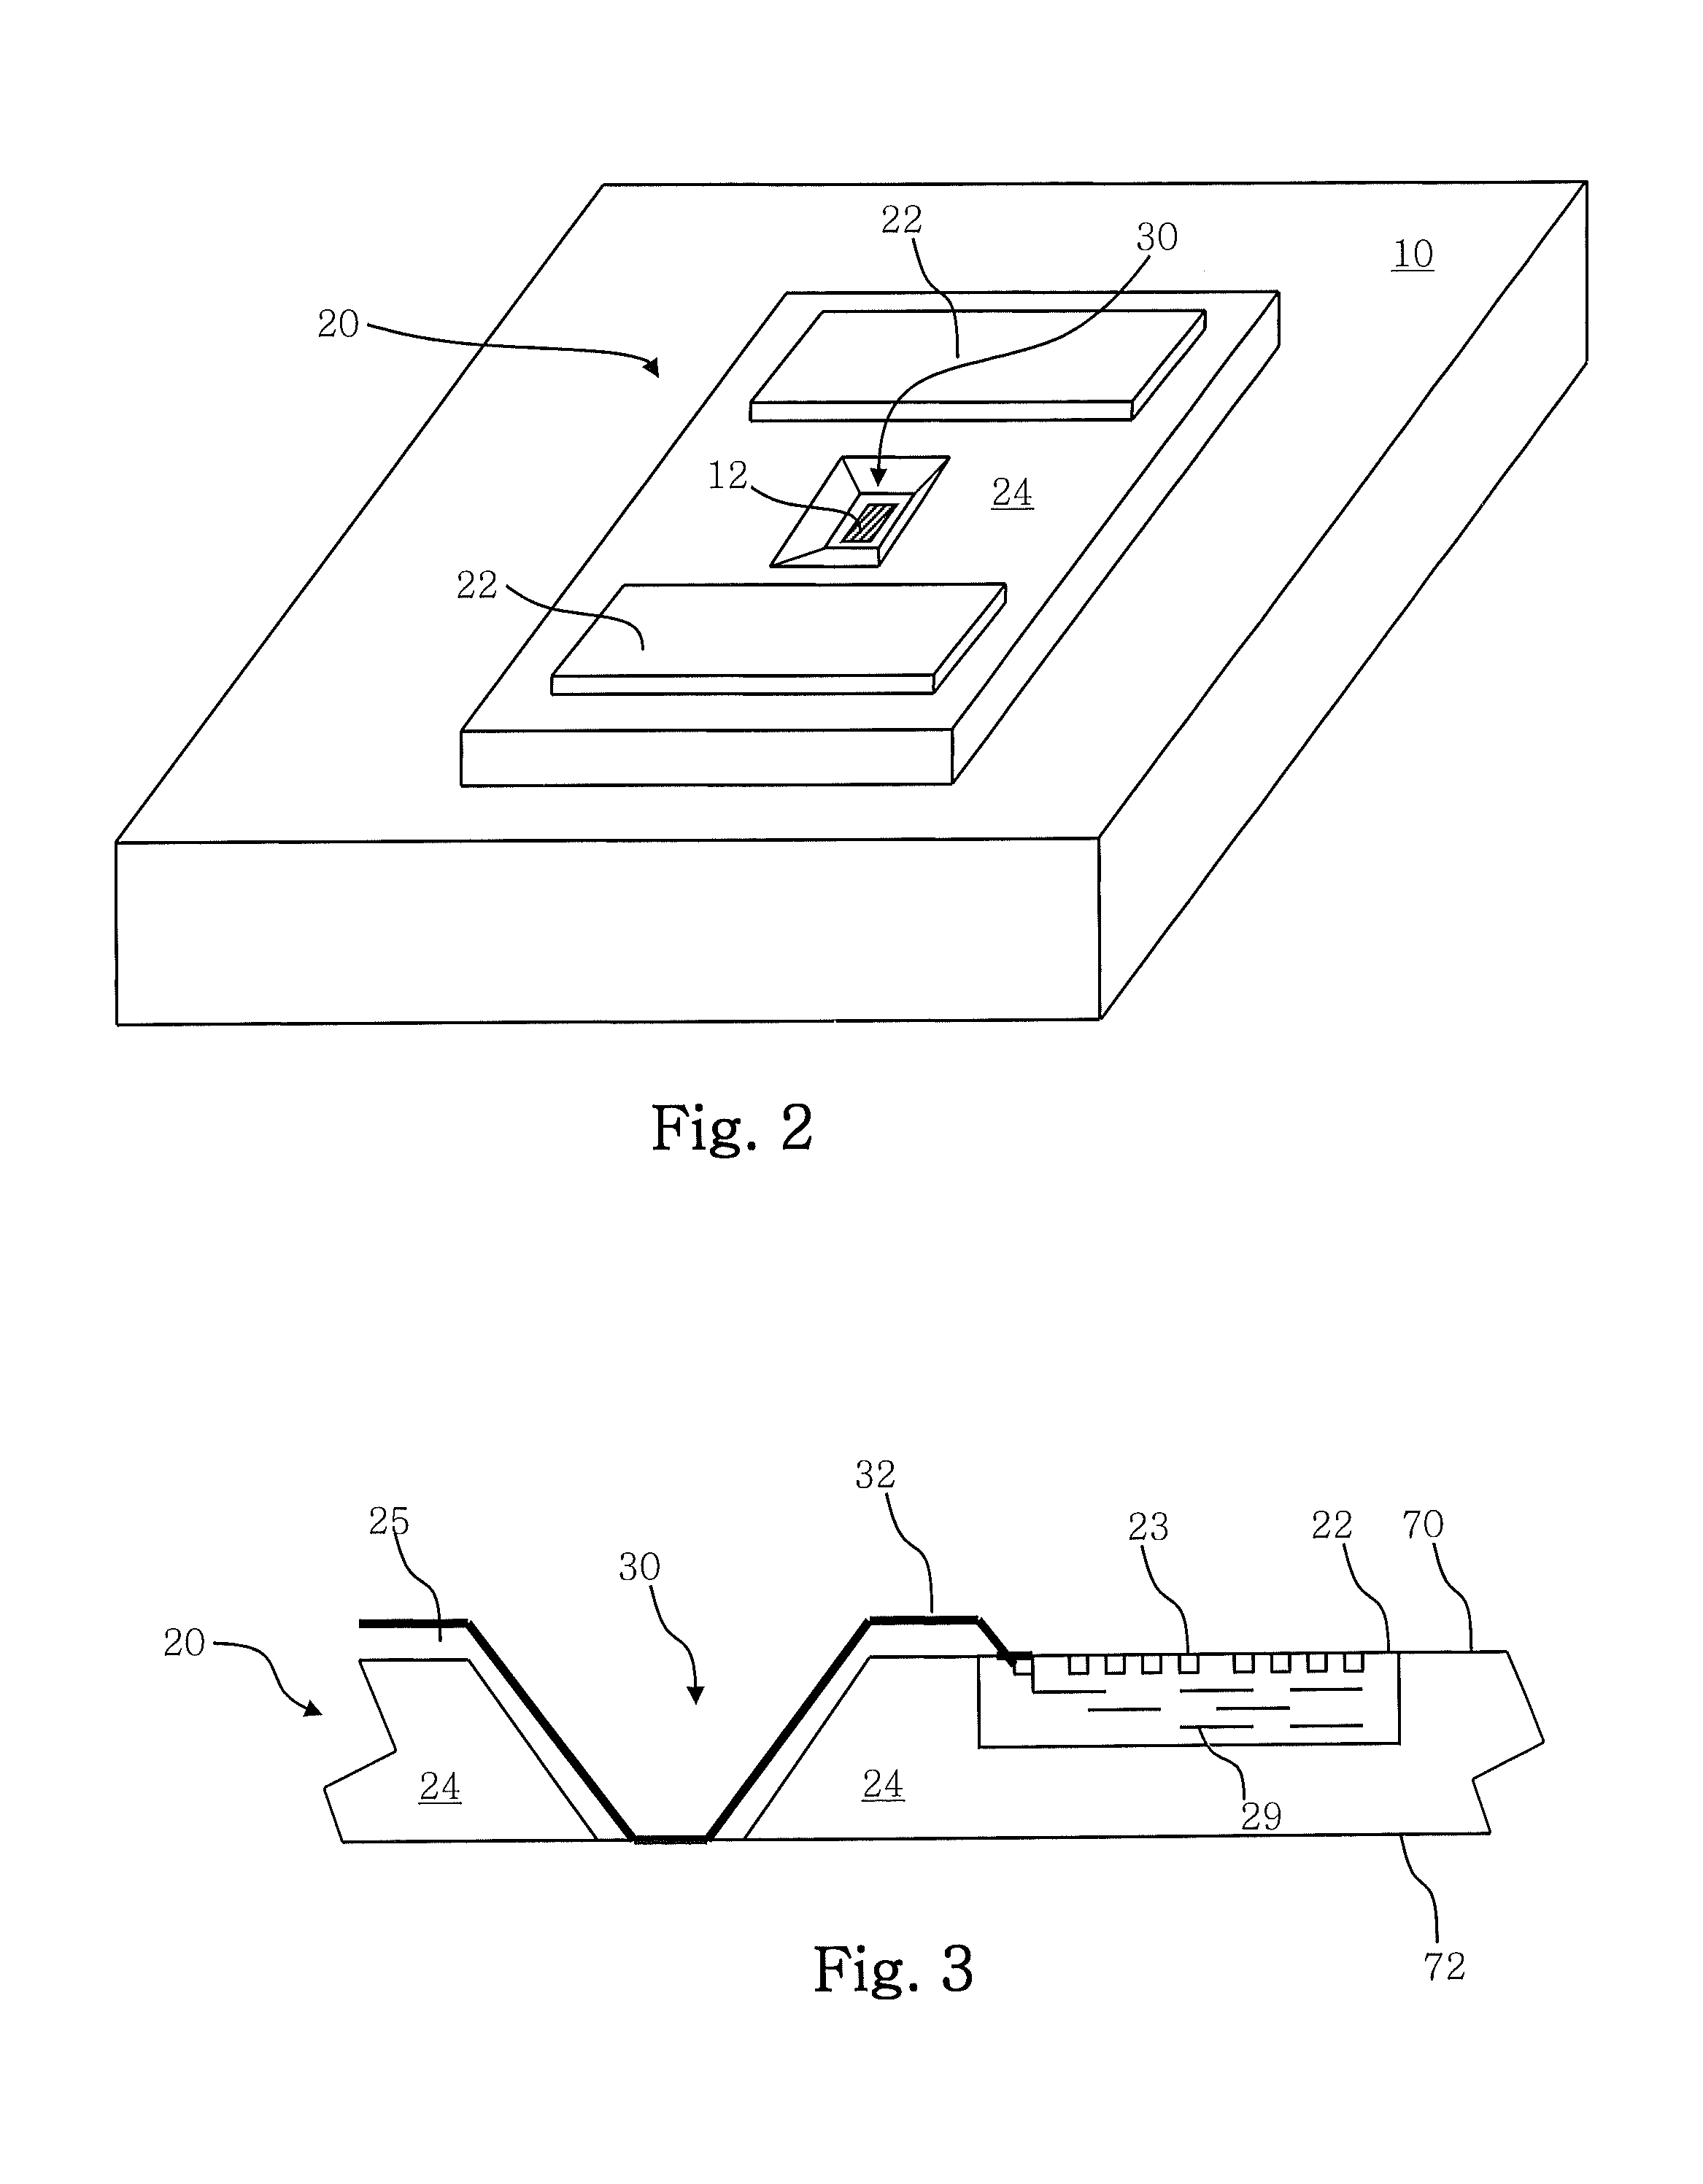 Electrically bonded arrays of transfer printed active components